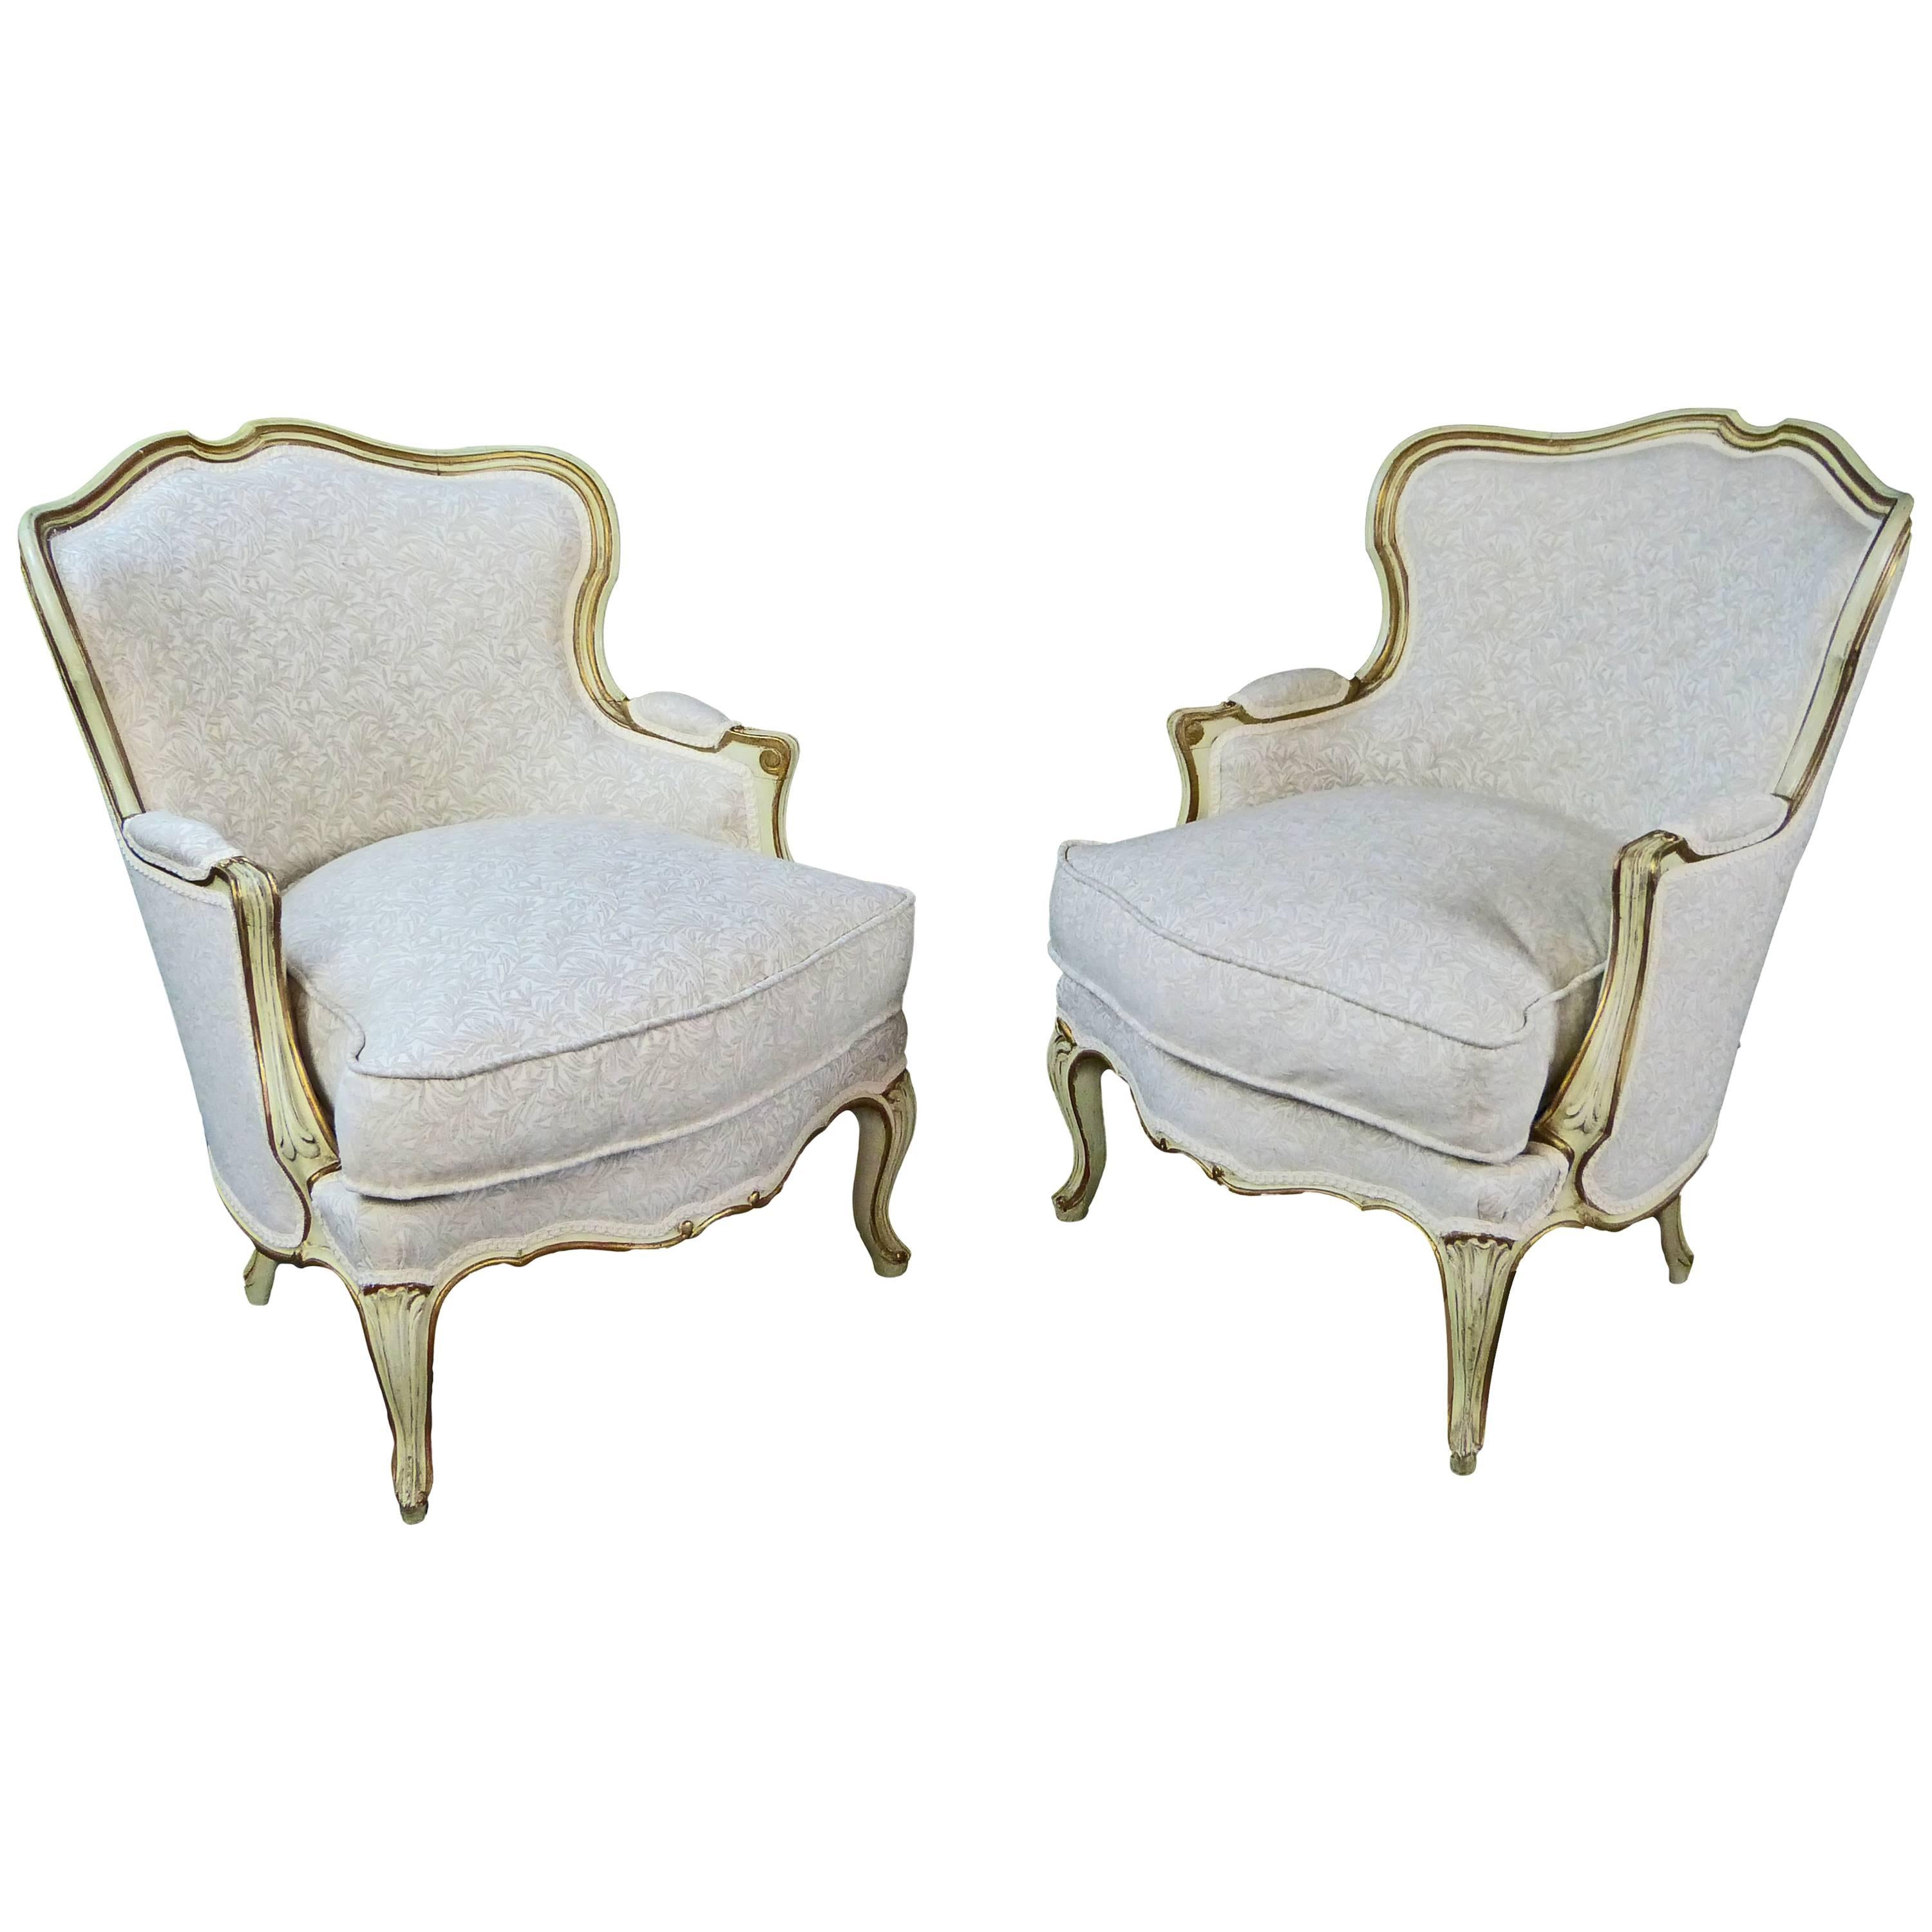 Armchair Pair French Louis XV Style Bergéres Painted and Parcel Gilt